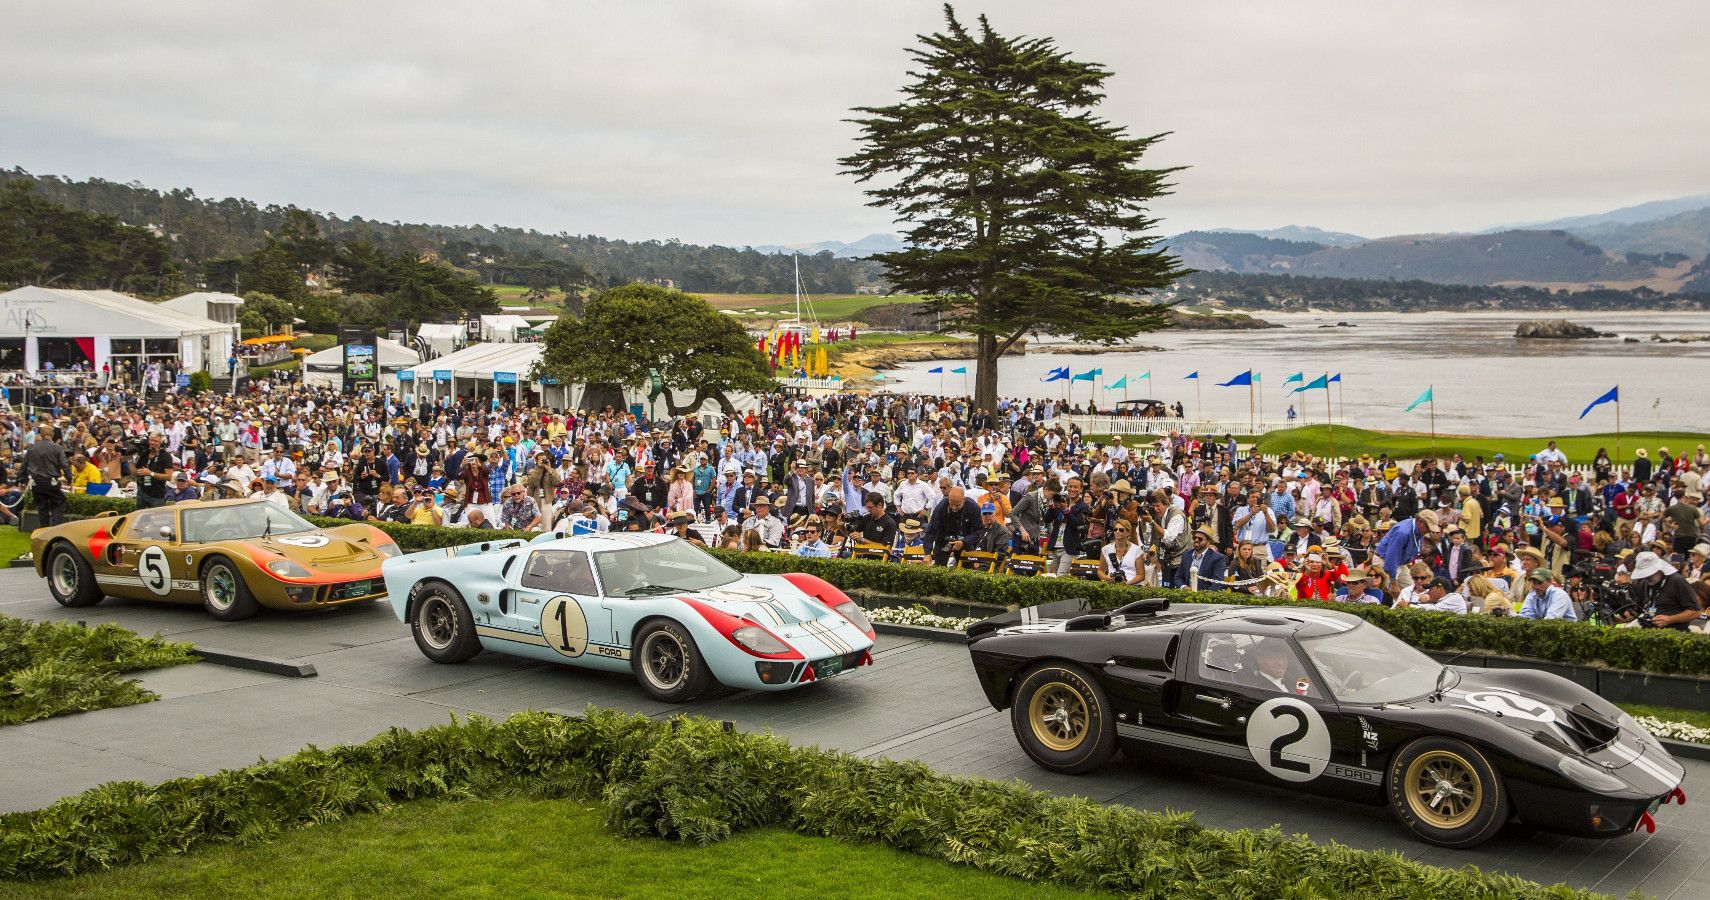 Monterey Car Week is the primary vintage car event in the United States.